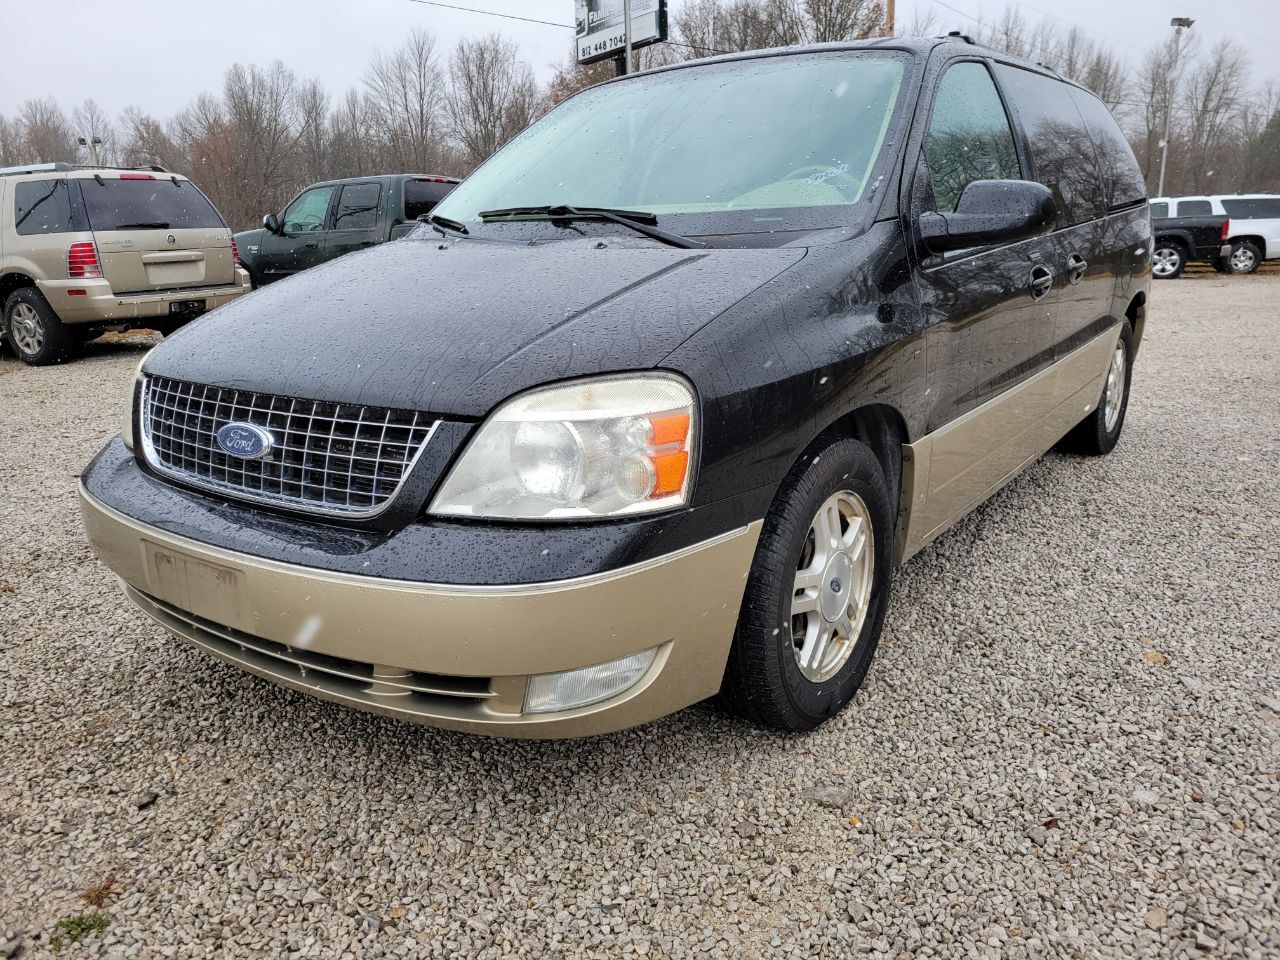 Ford Freestar For Sale In Athens, OH - Carsforsale.com®